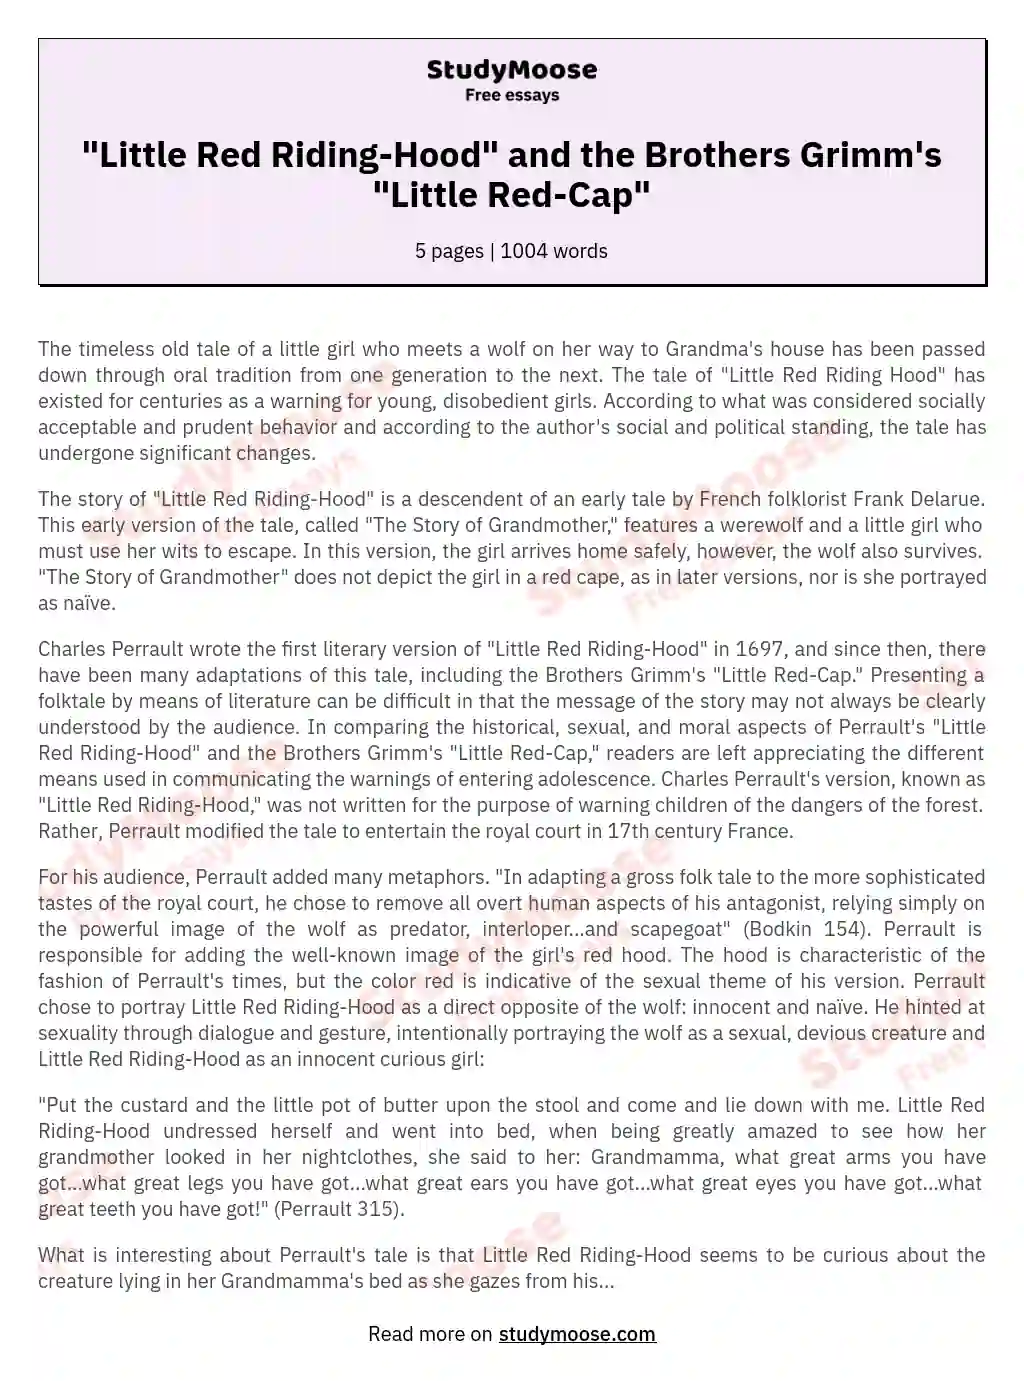 "Little Red Riding-Hood" and the Brothers Grimm's "Little Red-Cap" essay